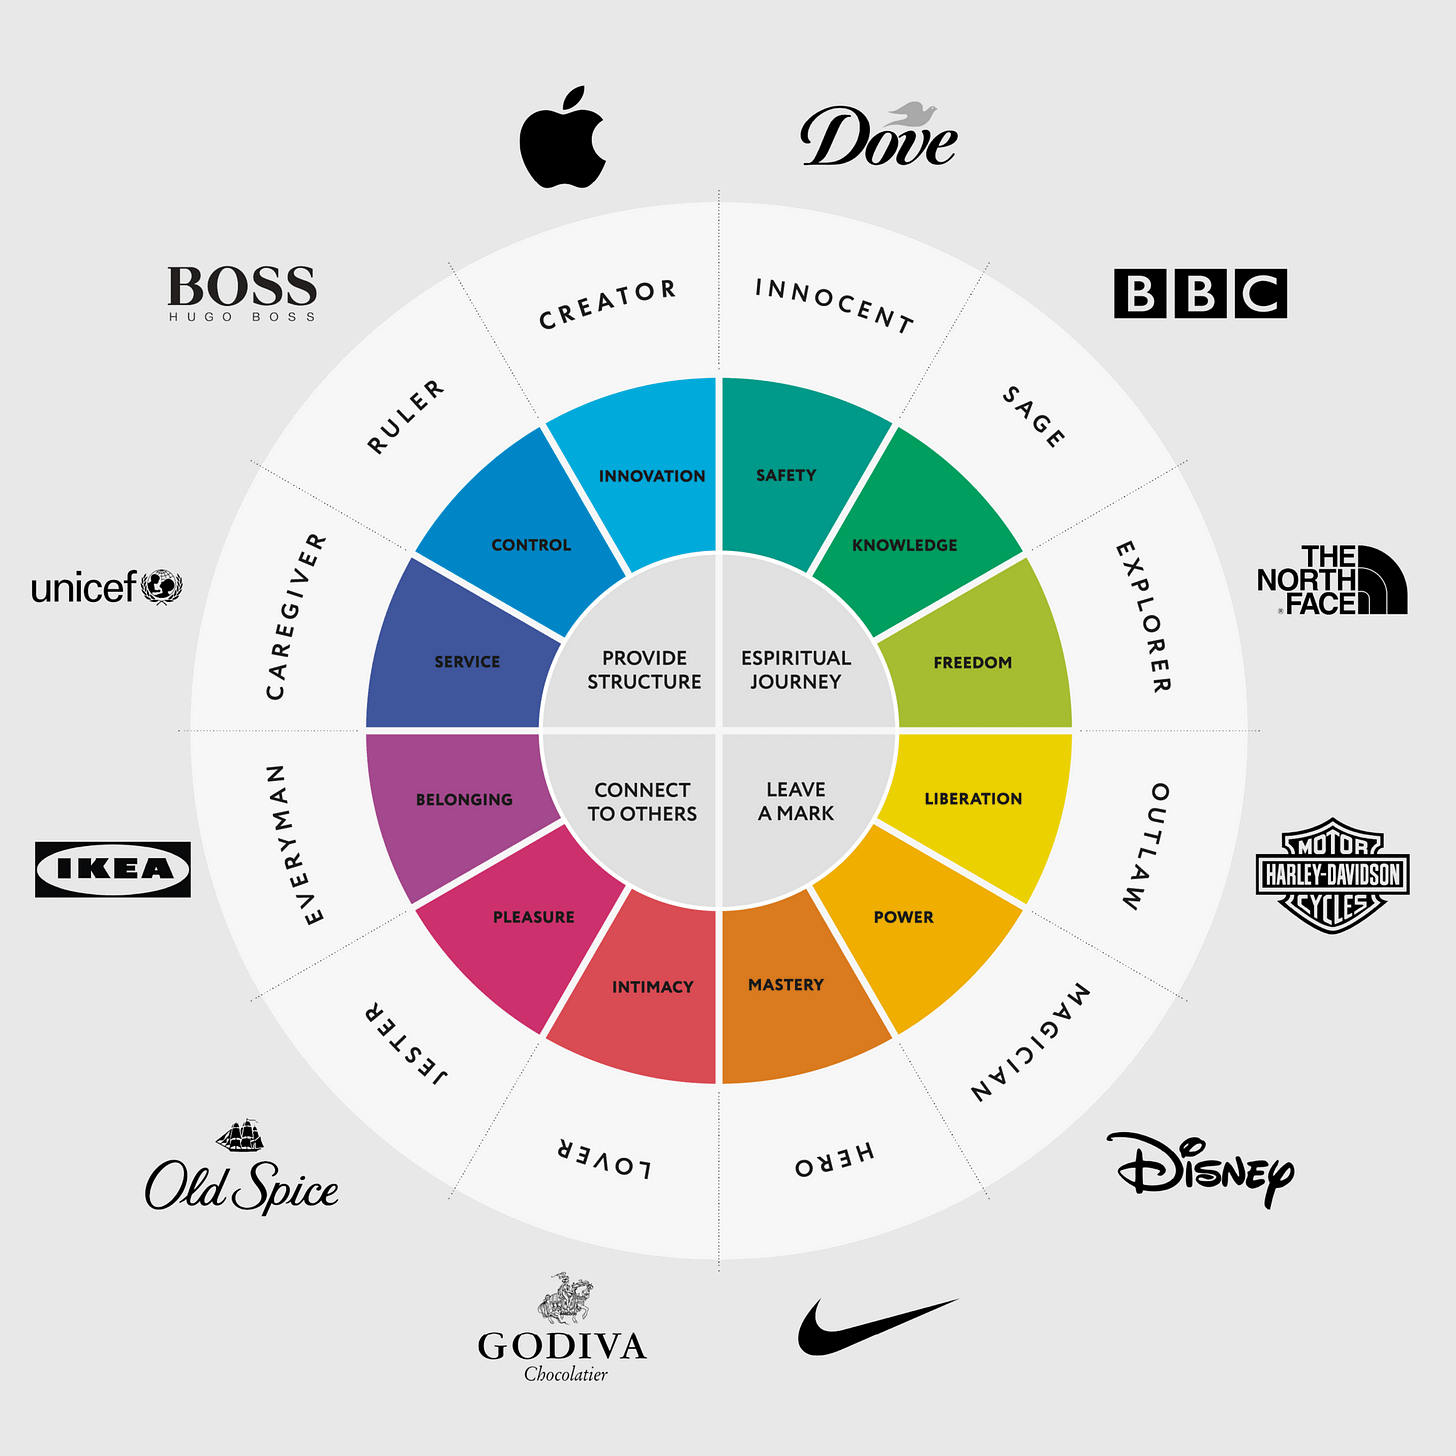 What are Brand Archetypes and why are they important?